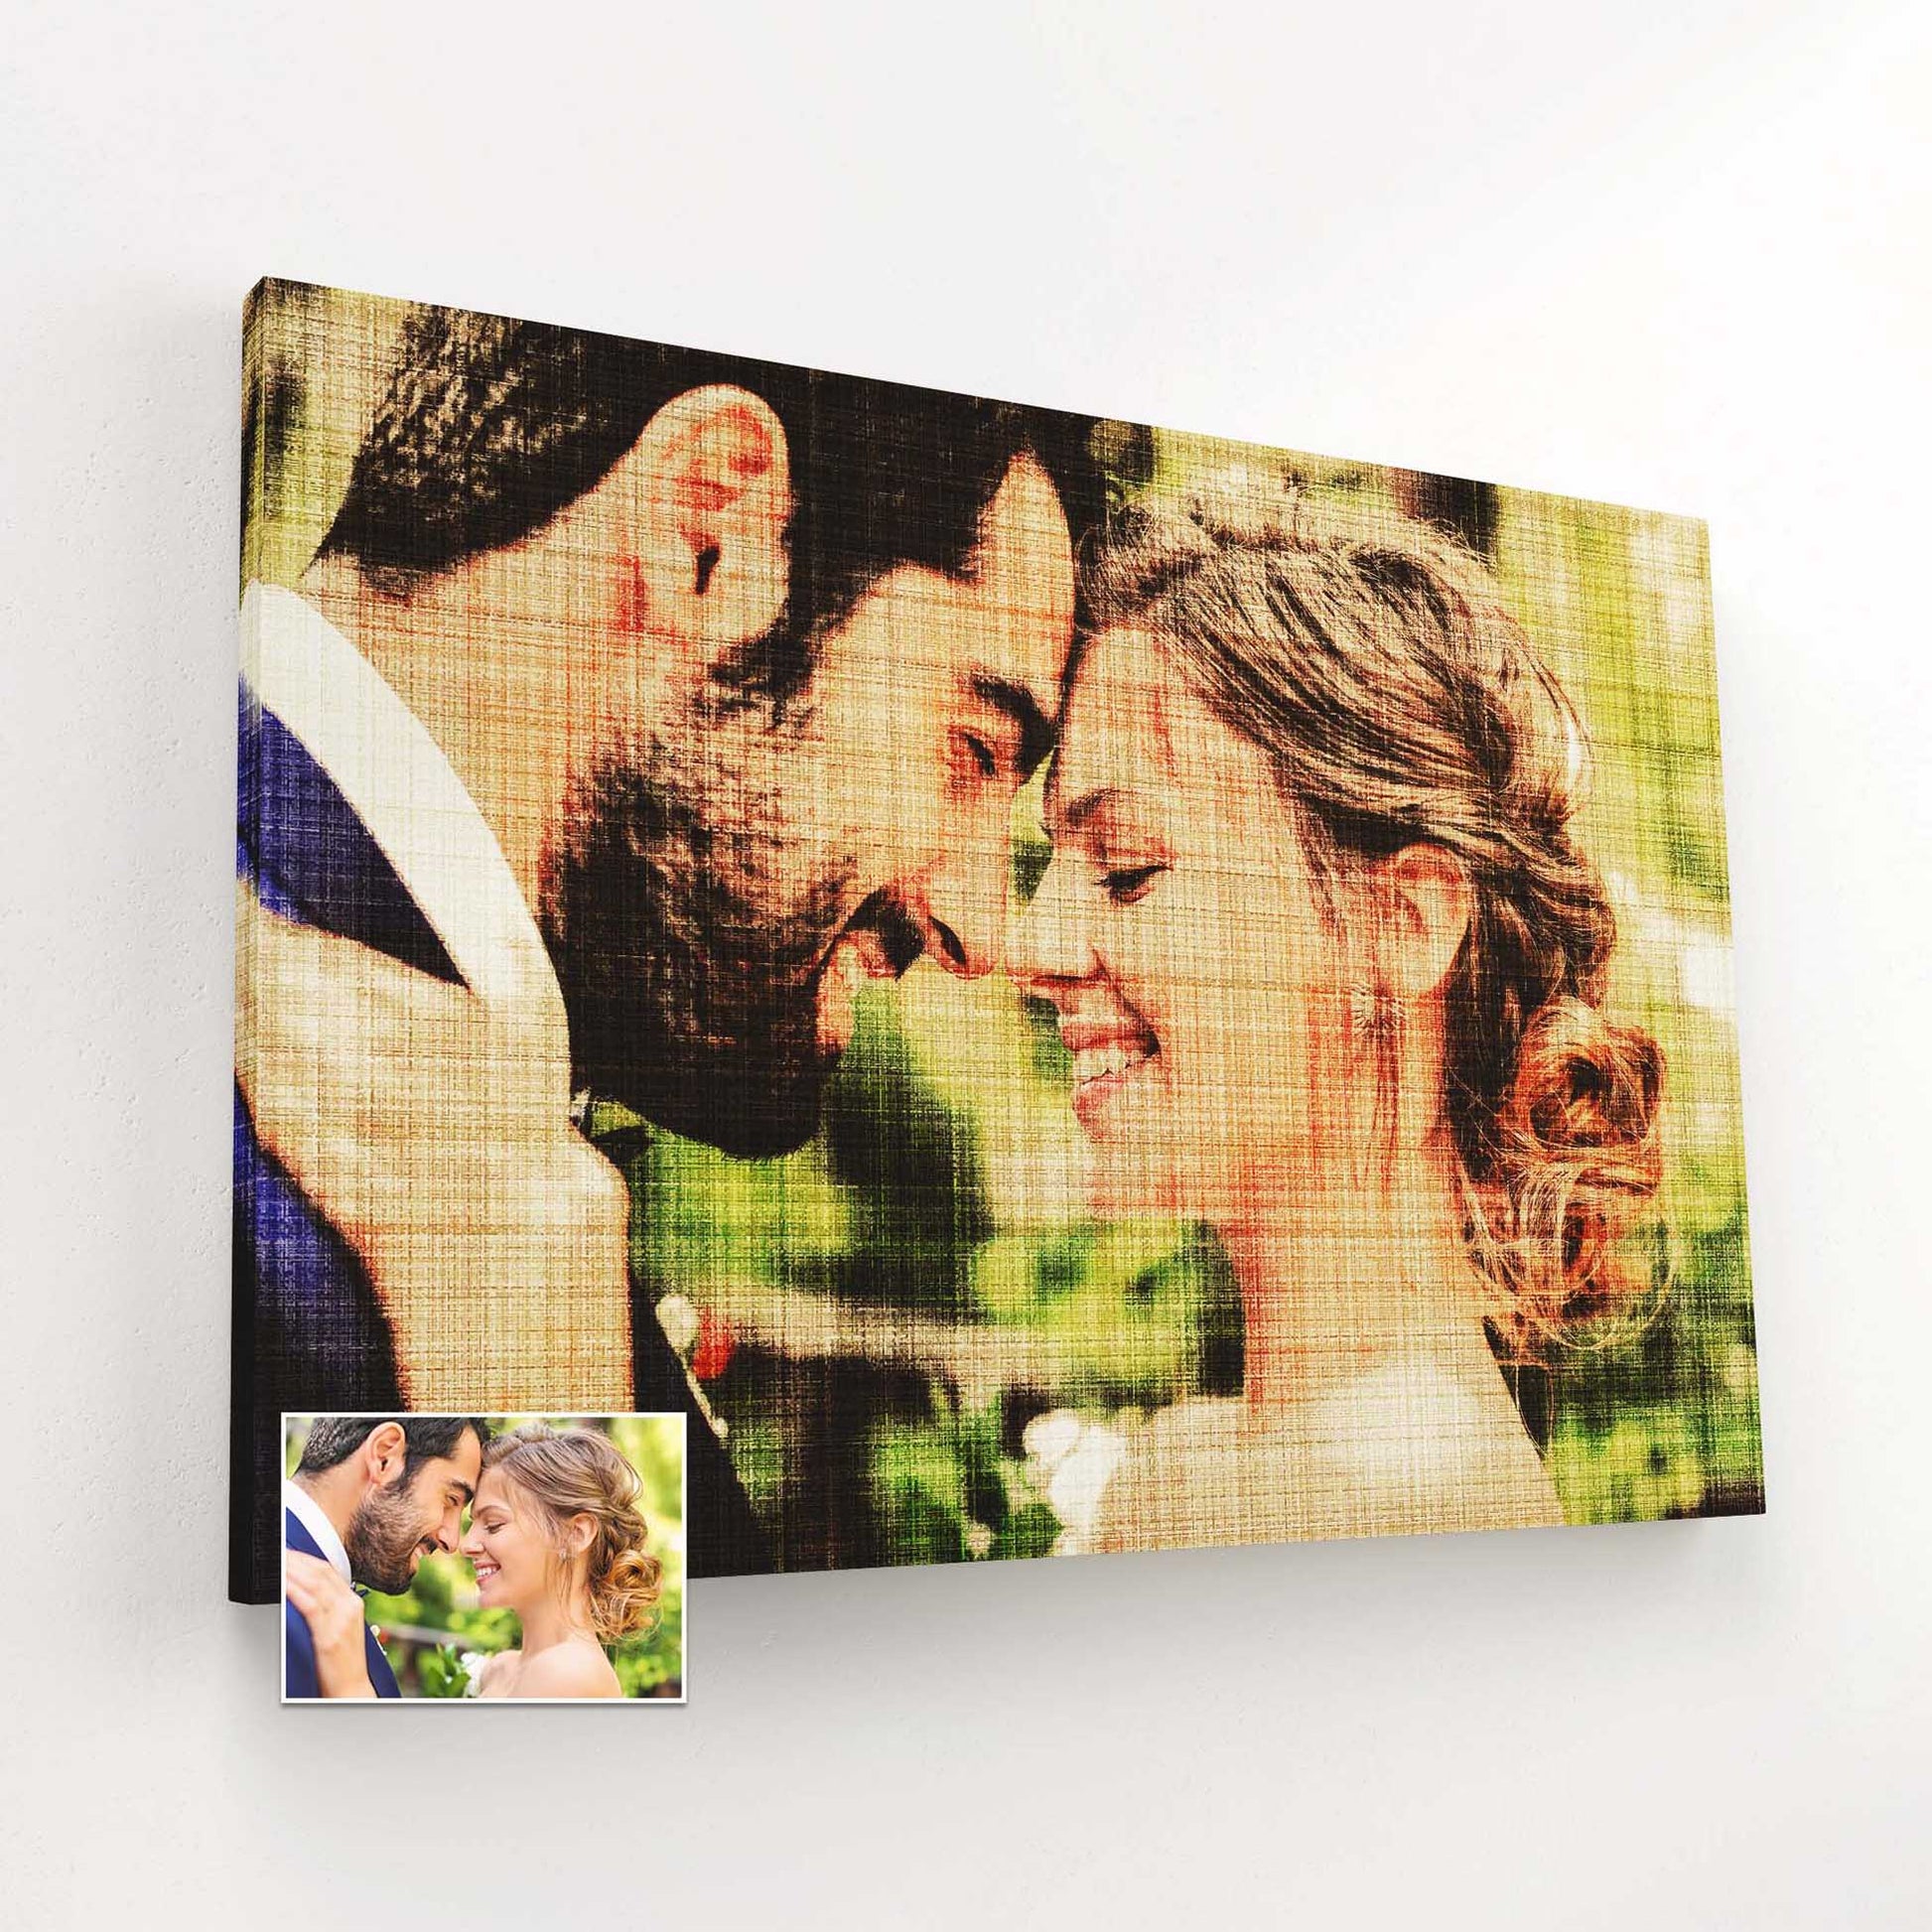 Elevate your home decor with a Personalised Fabric Texture Canvas, featuring an original and unique design. This canvas is created by painting from your photo, ensuring a personalized touch. The artwork is a fine art masterpiece